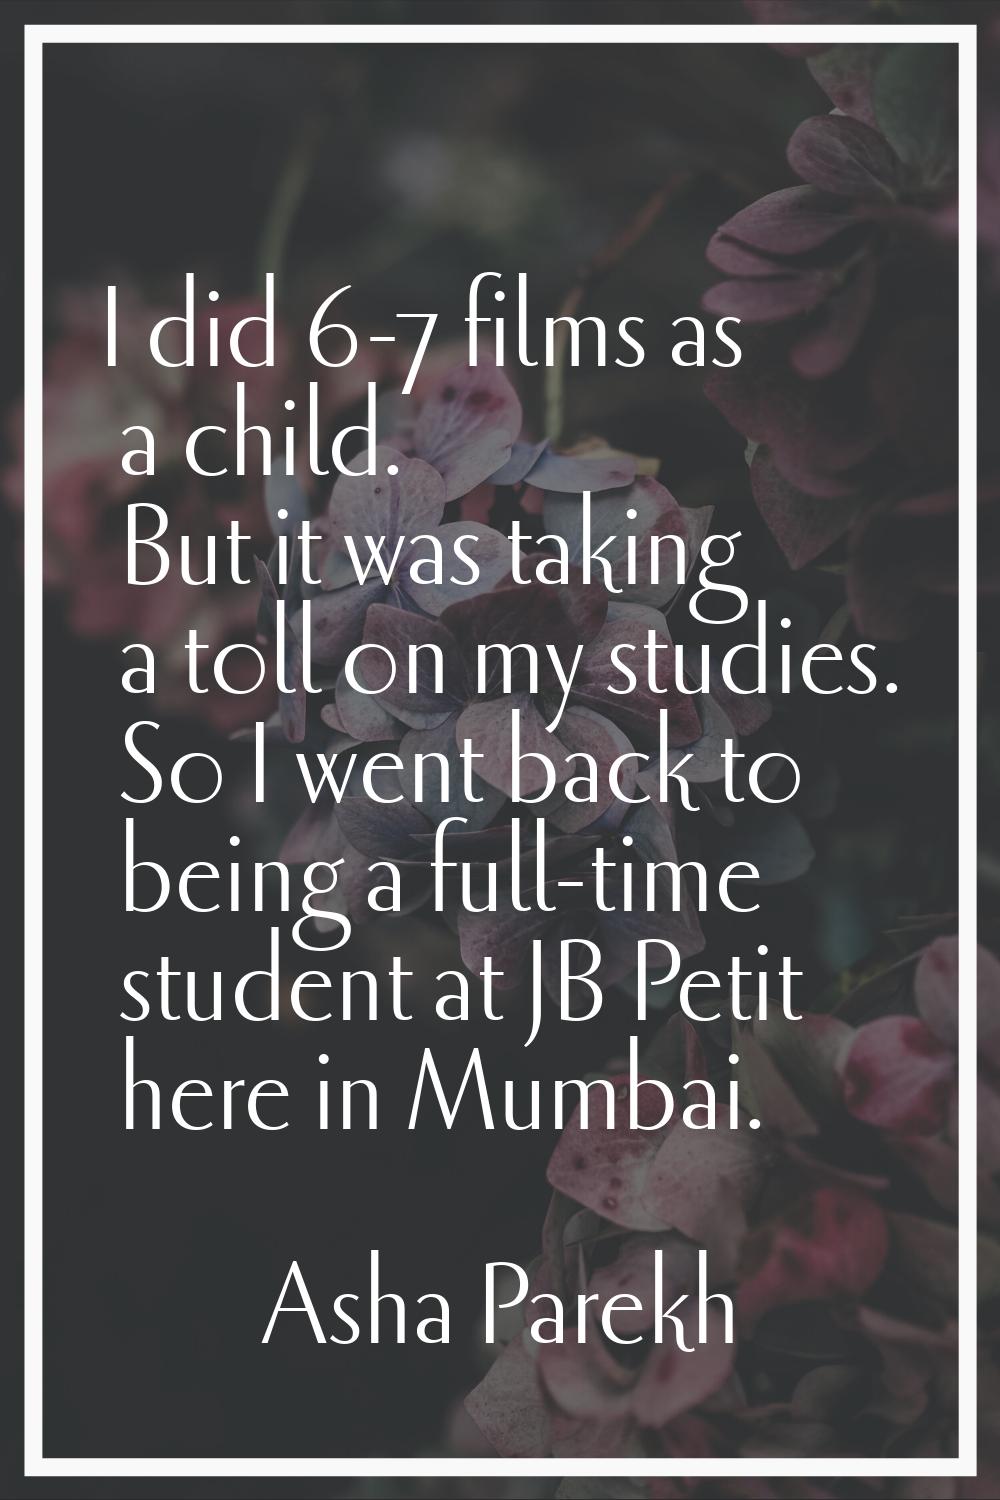 I did 6-7 films as a child. But it was taking a toll on my studies. So I went back to being a full-